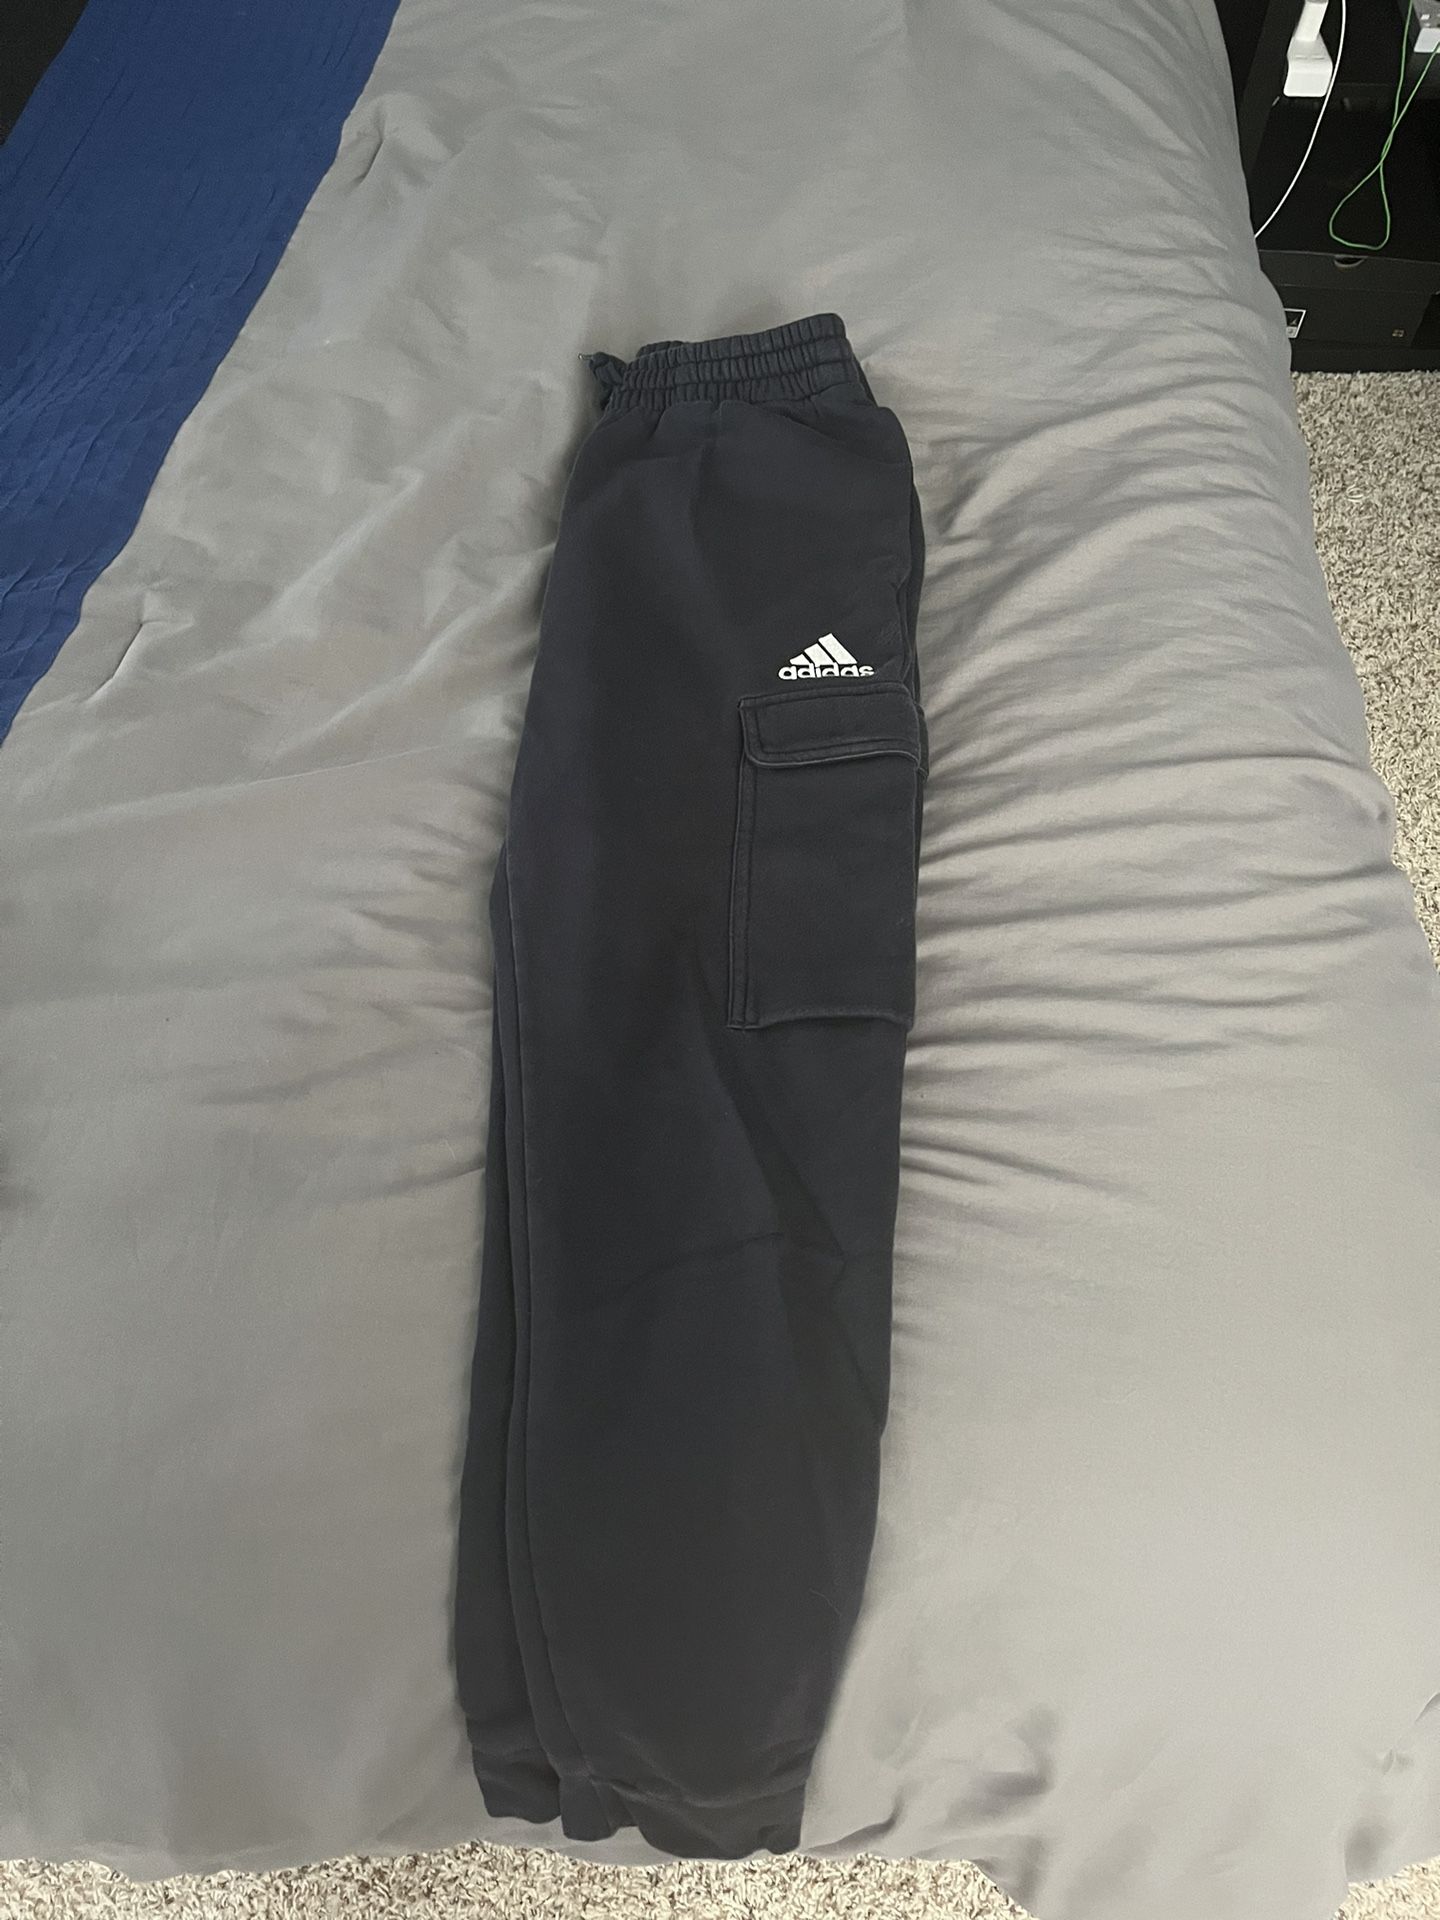 Adidas Cargo Pants Size Small